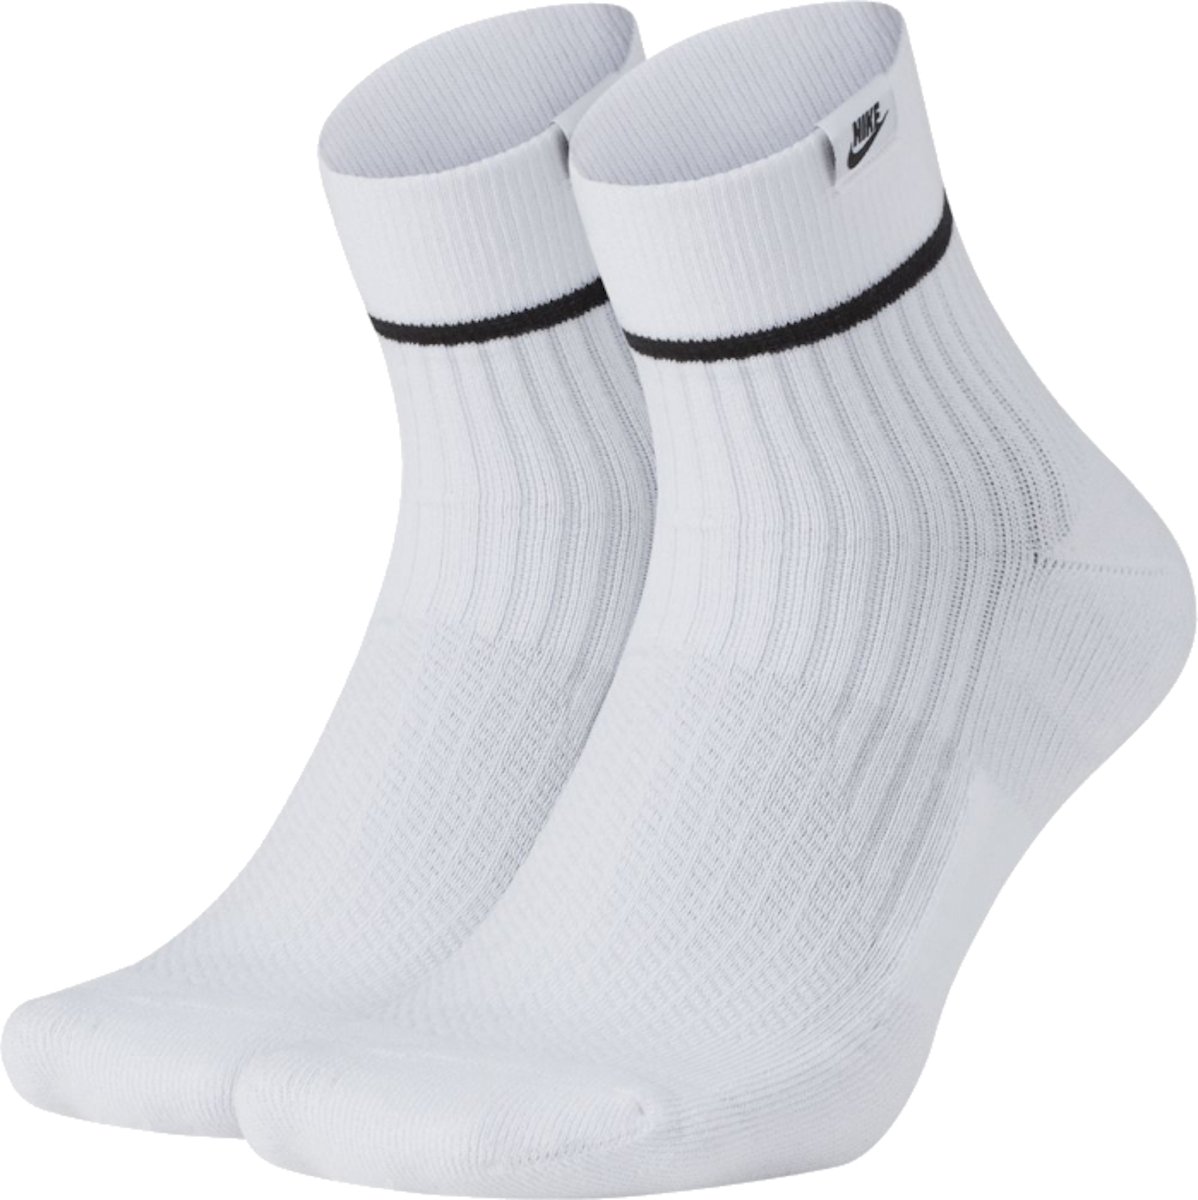 nike snkr sox ankle